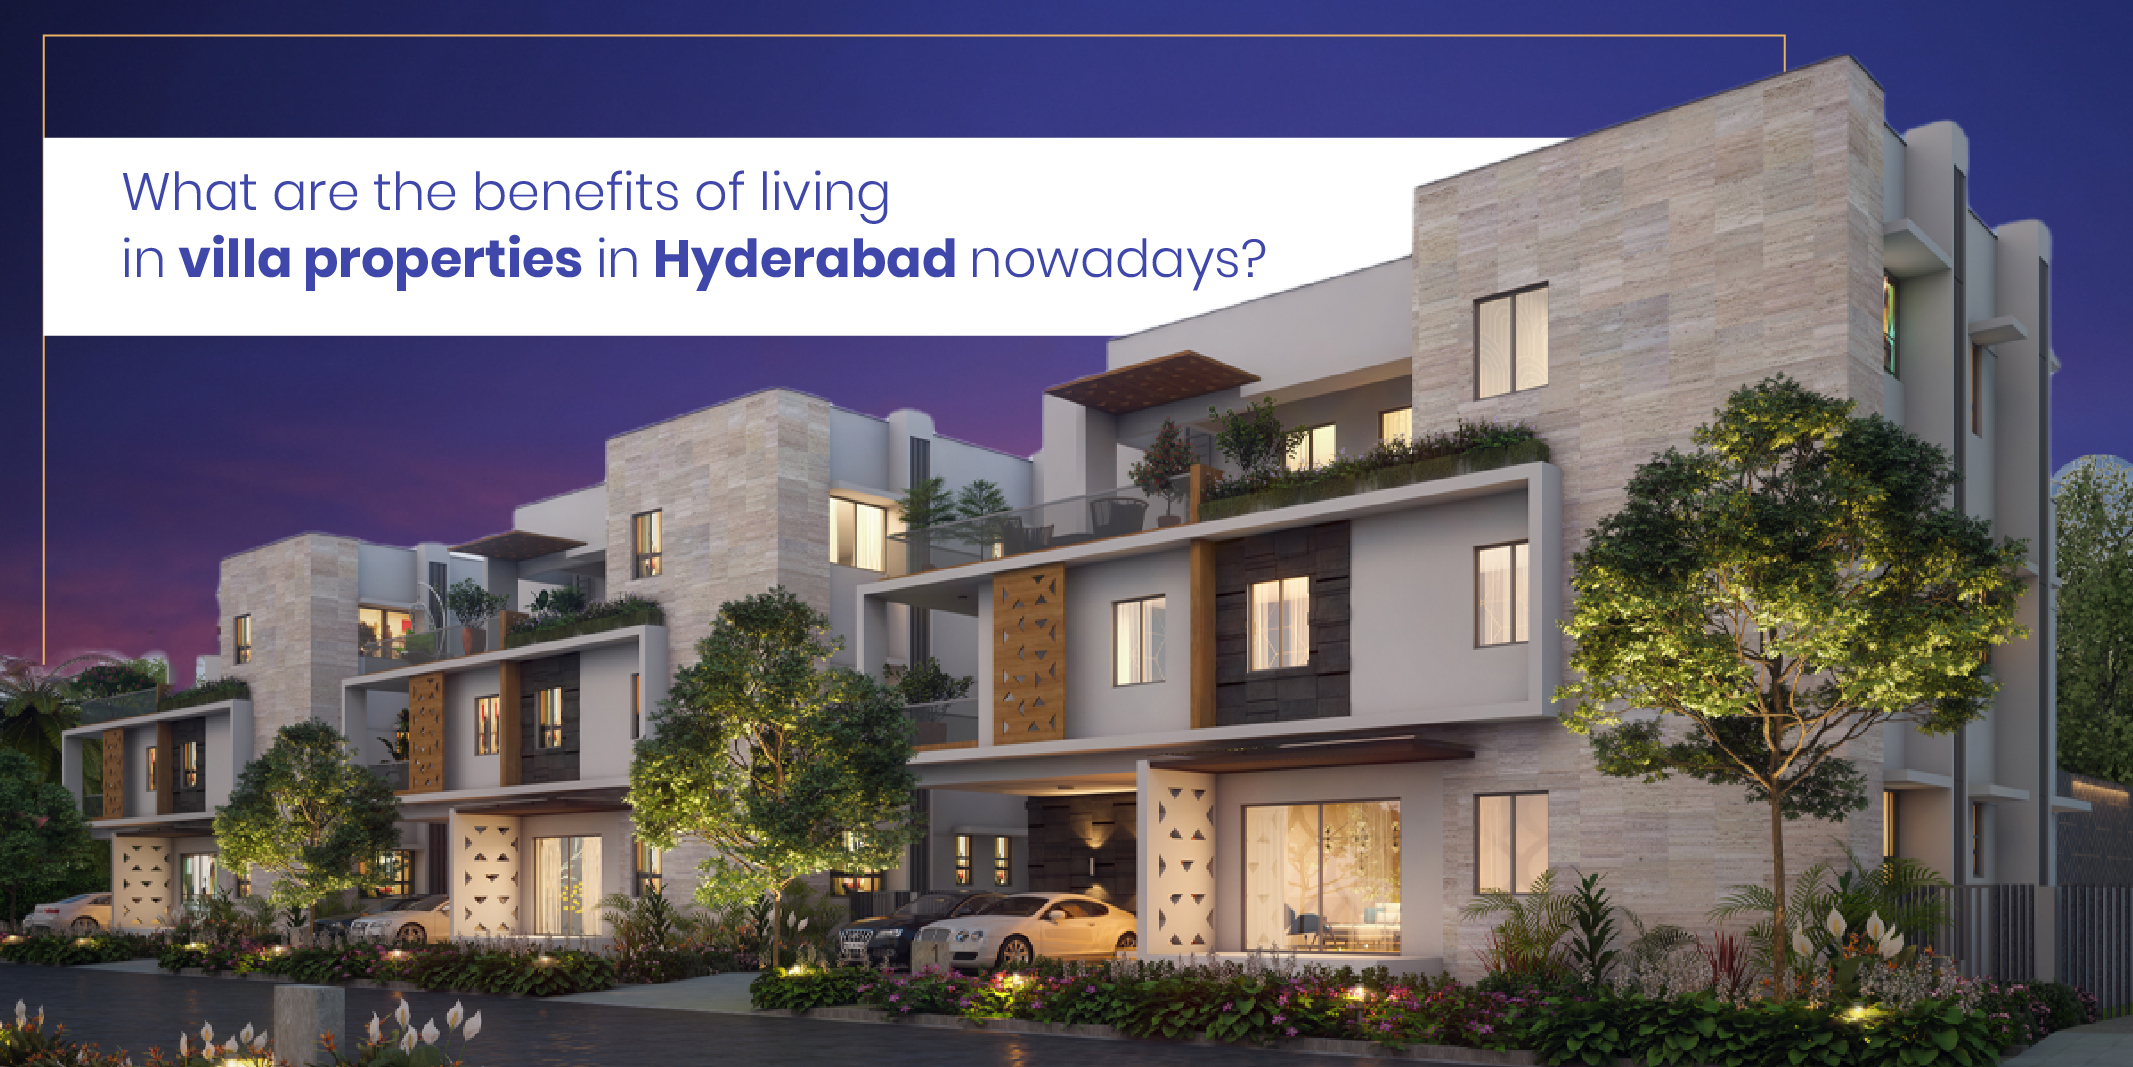 What are the benefits of living in villa properties in Hyderabad nowadays?